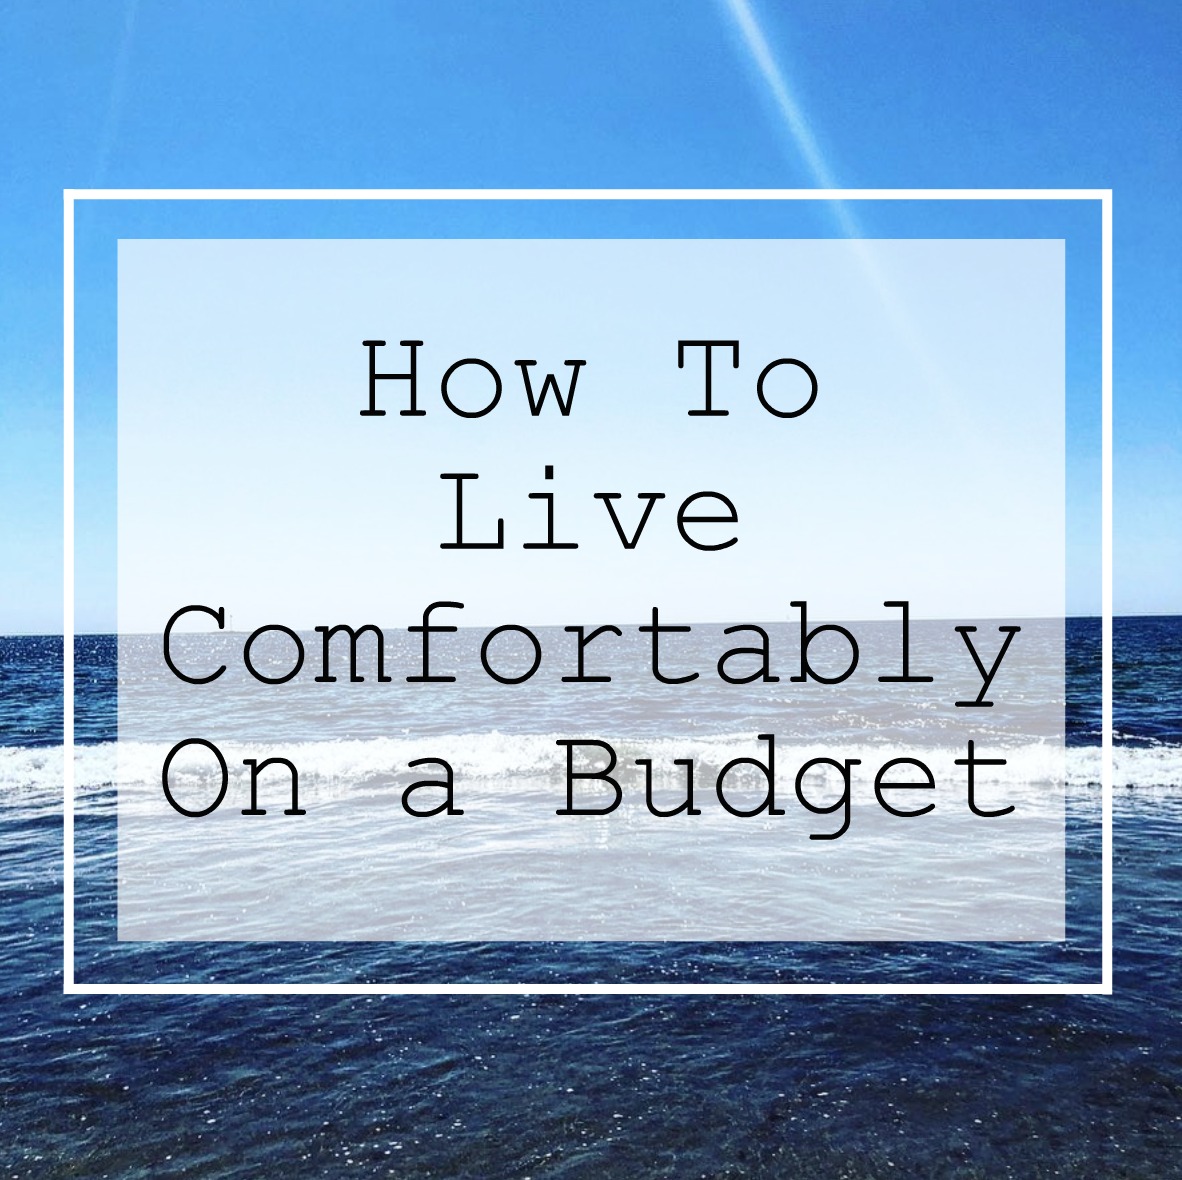 How To Live Comfortably On a Budget